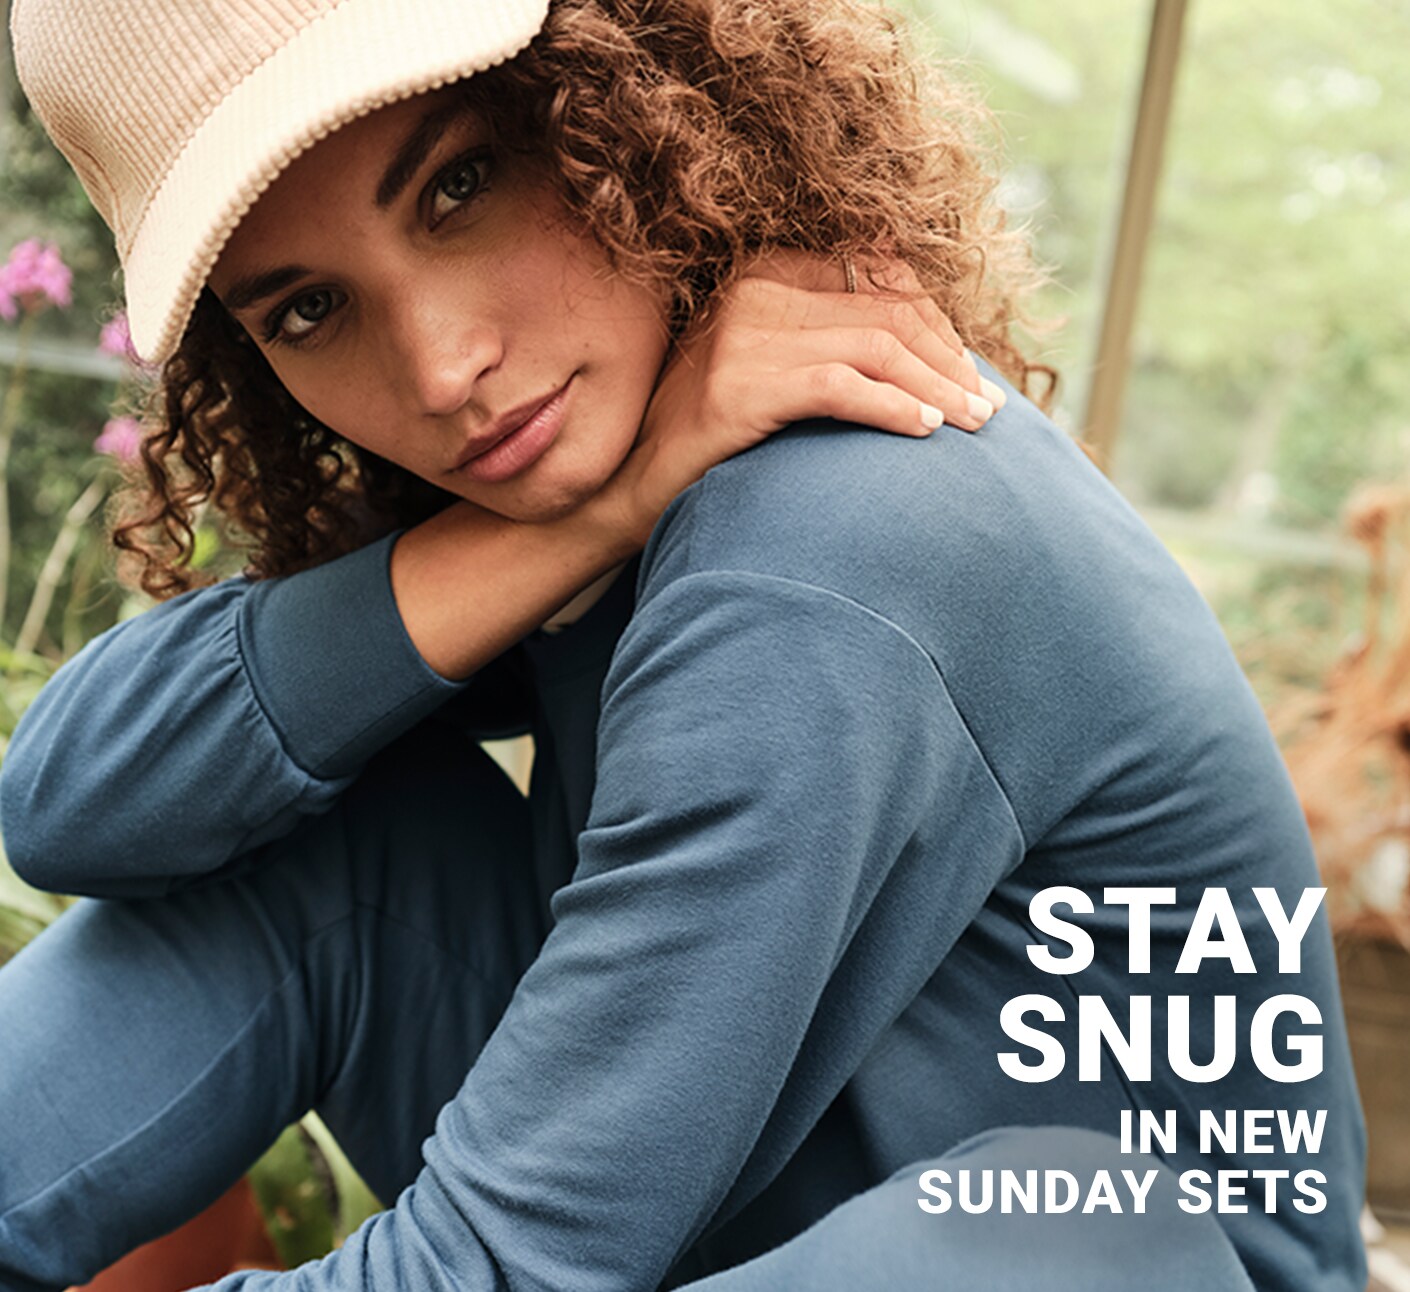 Stay Snug in New Sunday Sets.